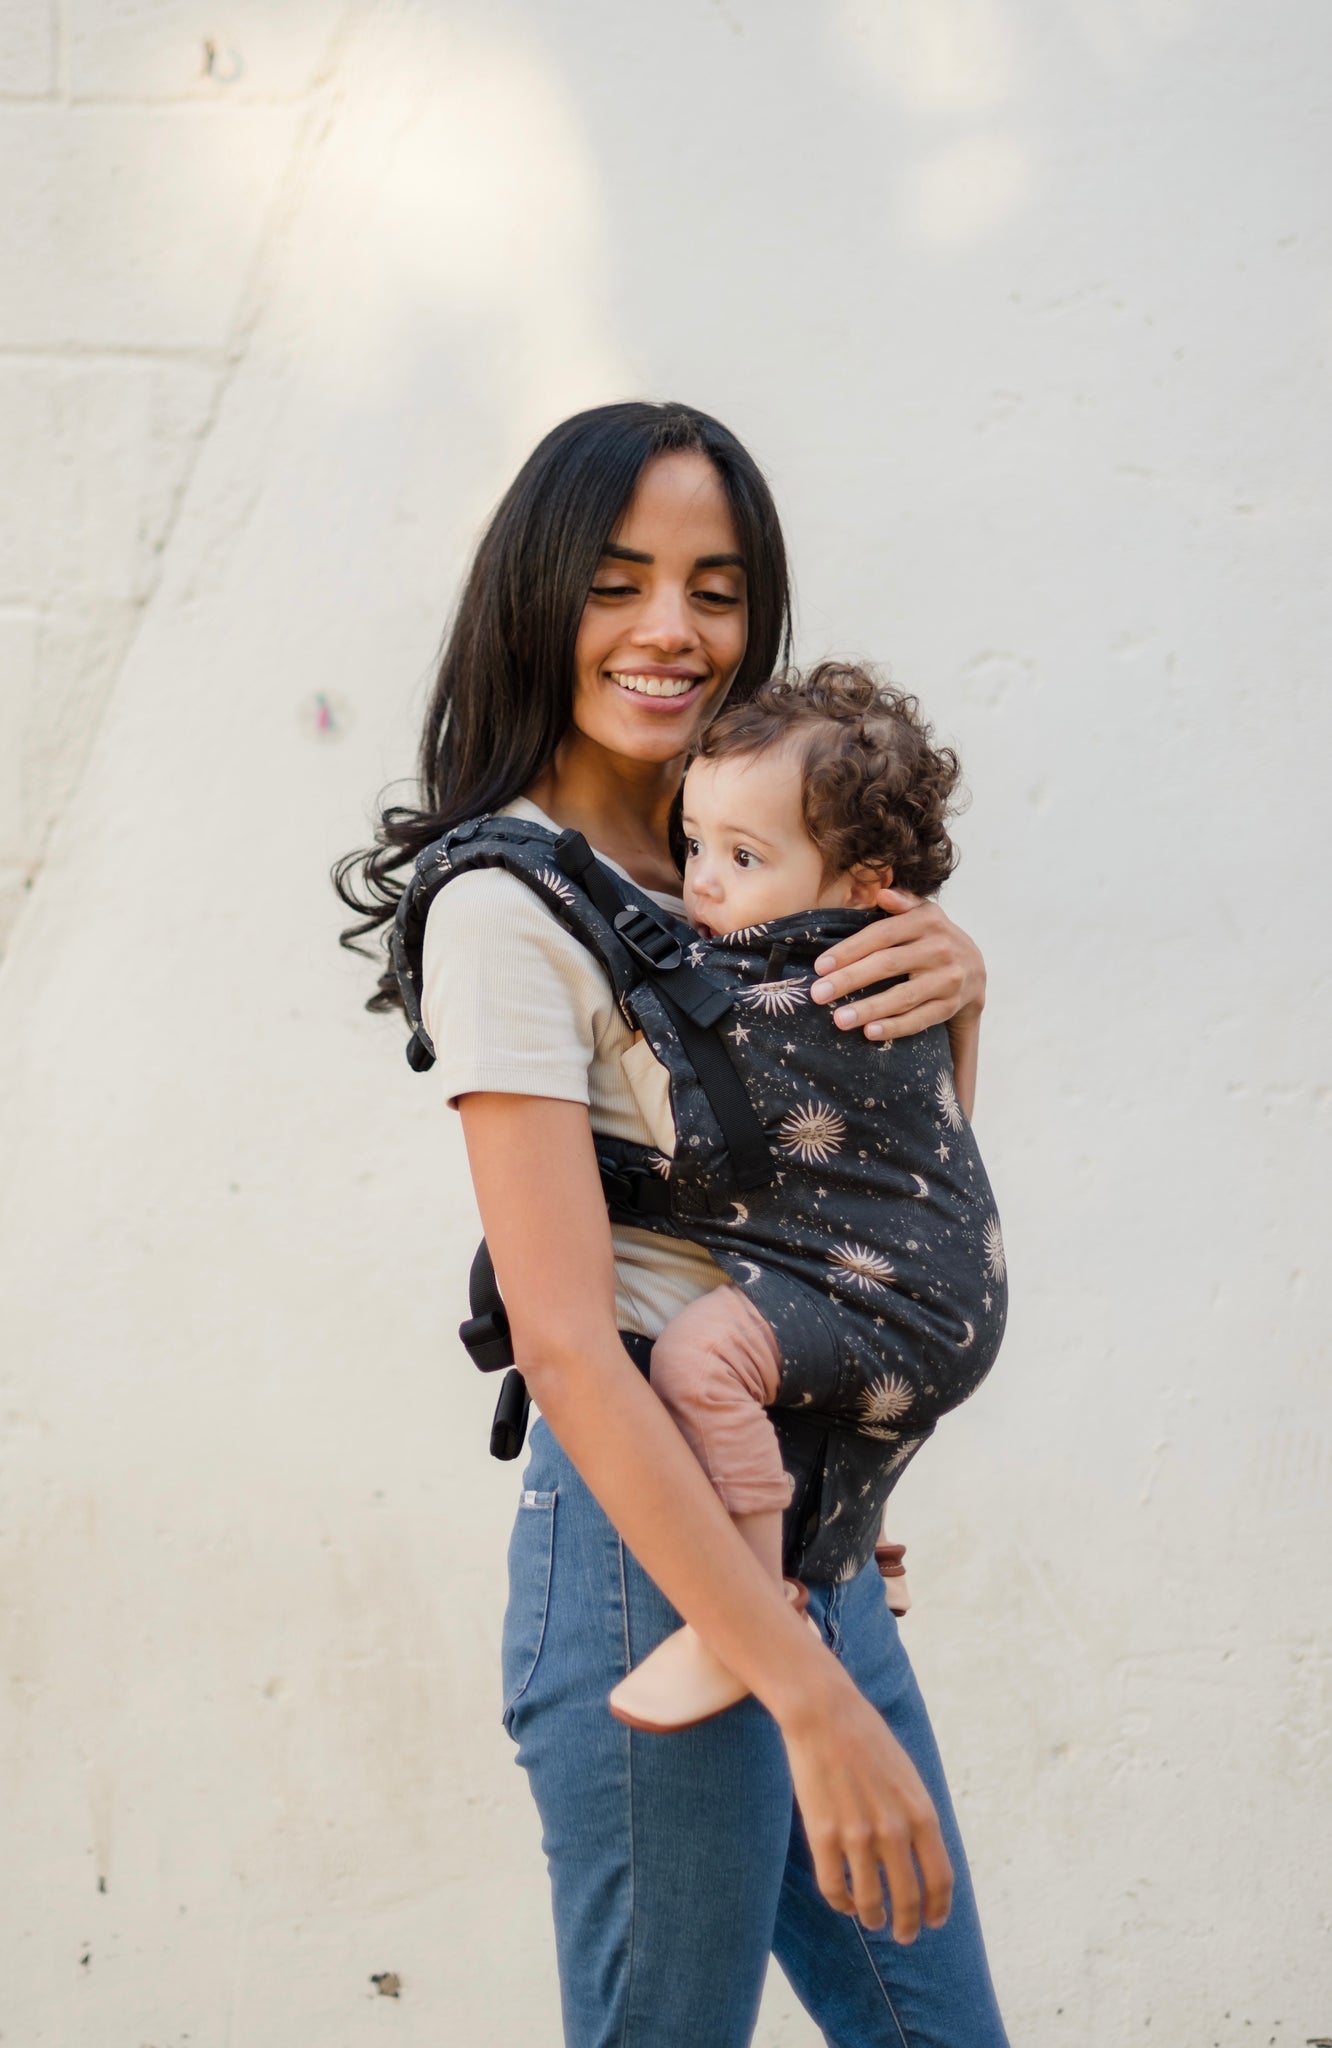 Introducing the Boba X - a versatile, adjustable baby carrier designed to last from birth to toddlerhood. Enjoy its softness, support, and adjustability, plus its beautiful celestial print on warm charcoal print. Shop now!